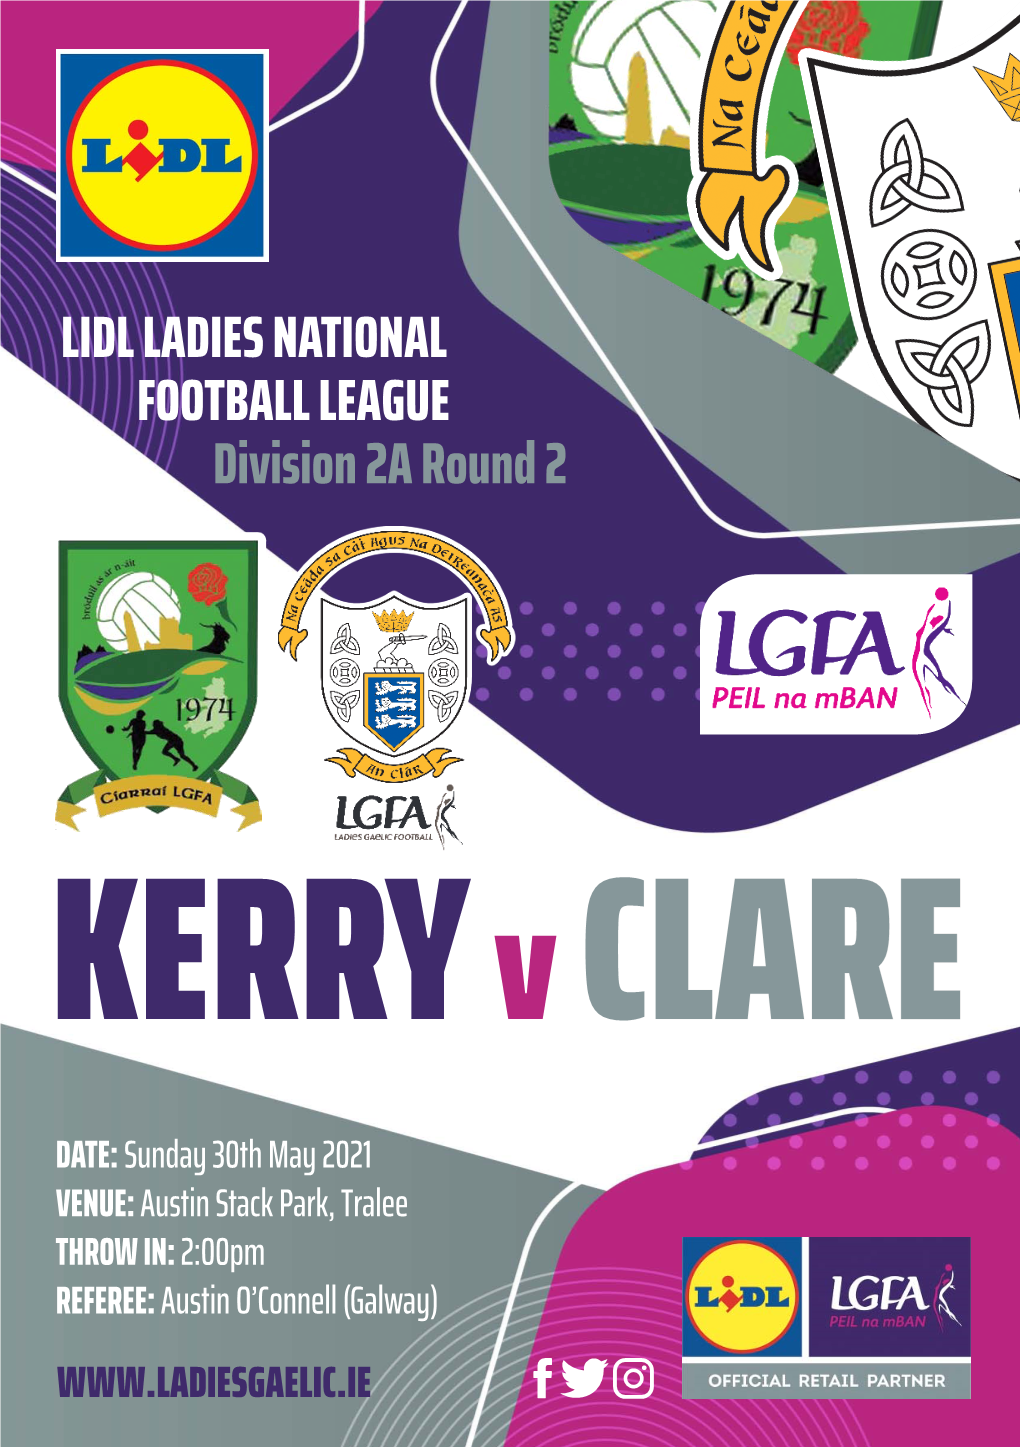 LIDL LADIES NATIONAL FOOTBALL LEAGUE Division 2A Round 2